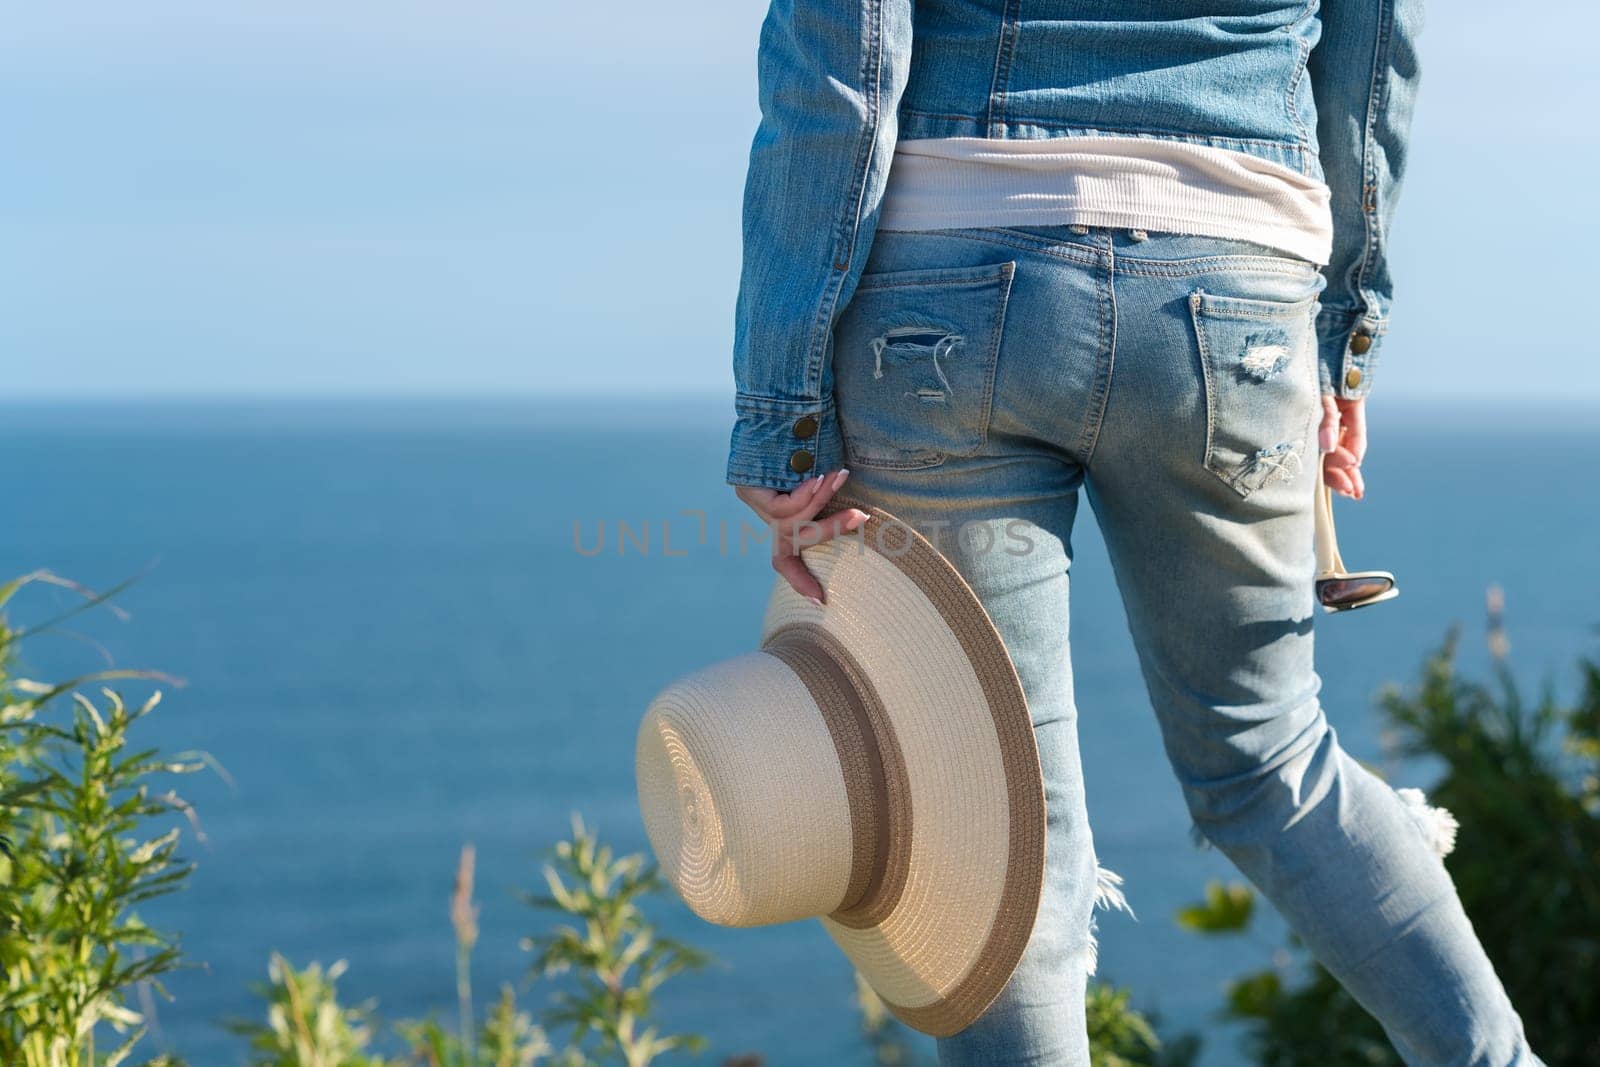 Cropped rear view below waist on legs of woman in blue jeans. Unrecognizable hipster female holding straw hat in one hand and sunglasses in other, standing in grass on seashore in sunny summer weather